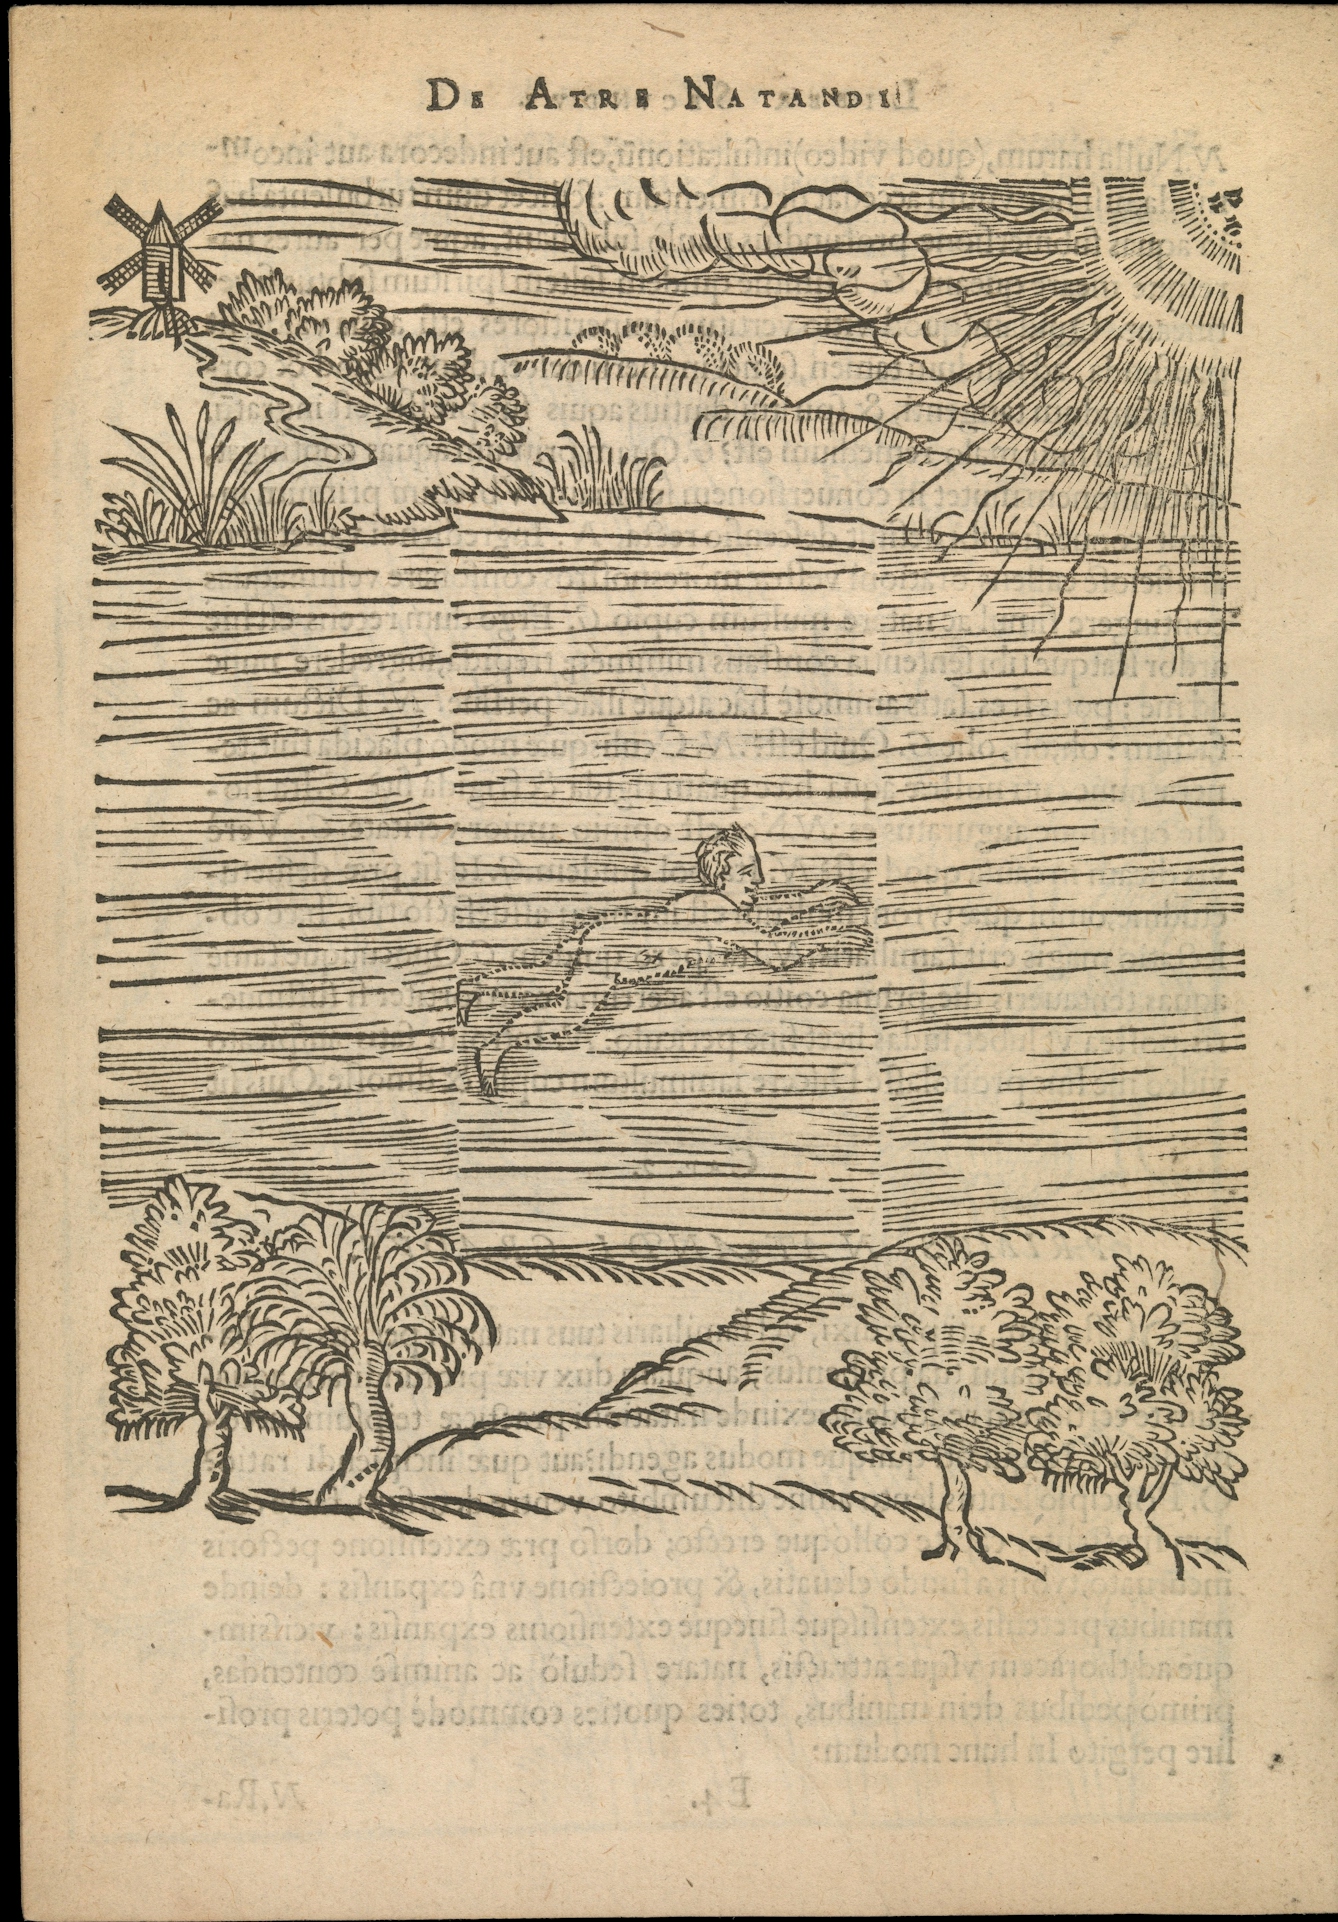 Line engraving of a man swimming in a body of water with trees on the shore below and a windmill on the shore above.